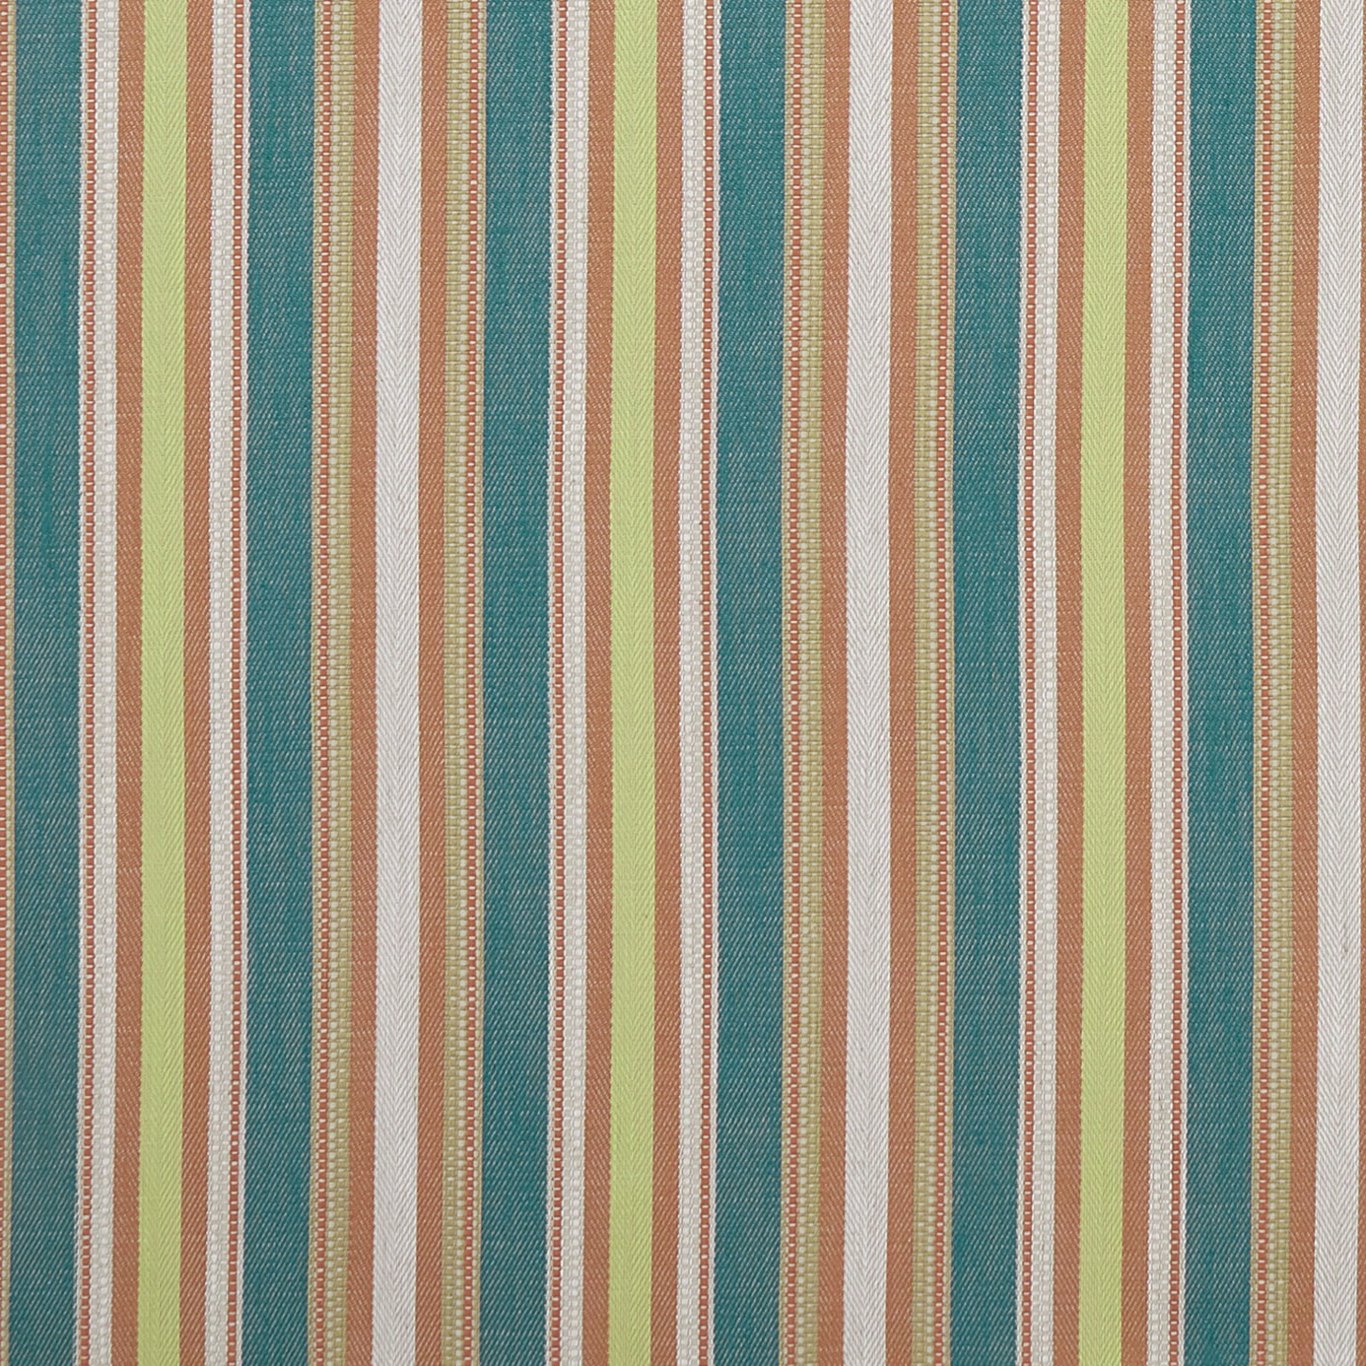 Ziba Teal/Spice Fabric by CNC